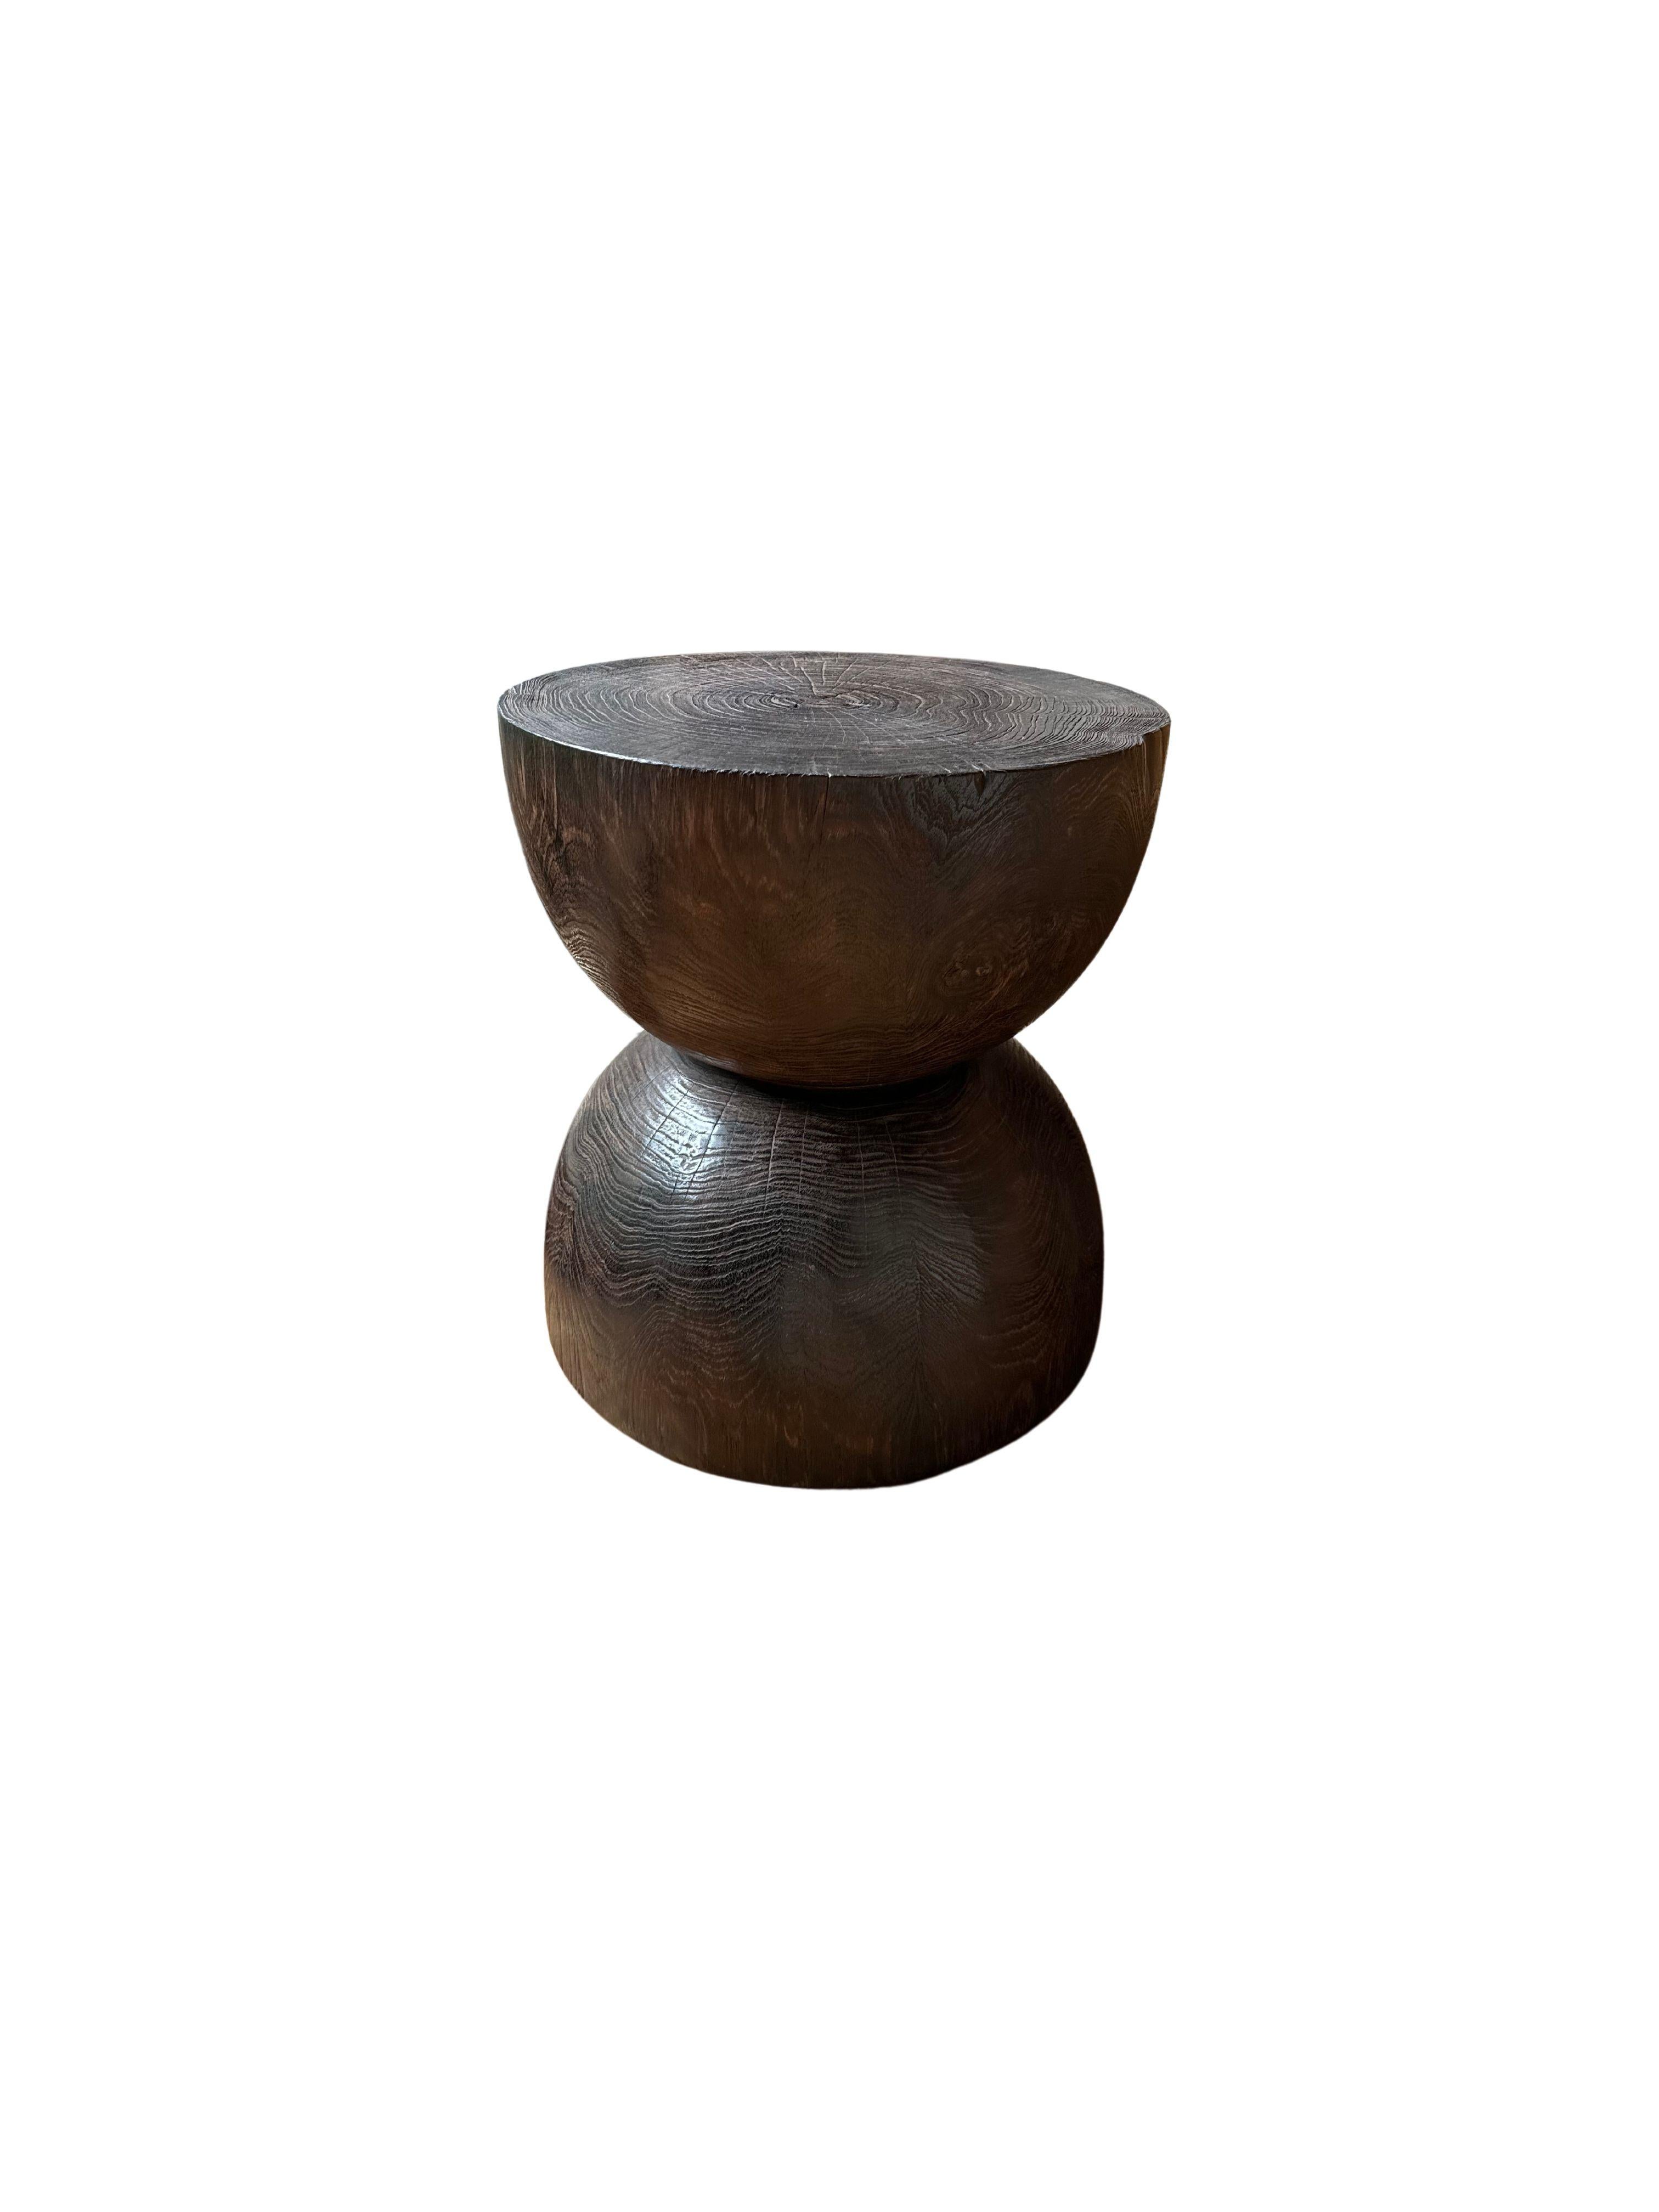 Hand-Crafted Round Teak Wood Side Table, Burnt Finish, Hour Glass Design, Modern Organic For Sale